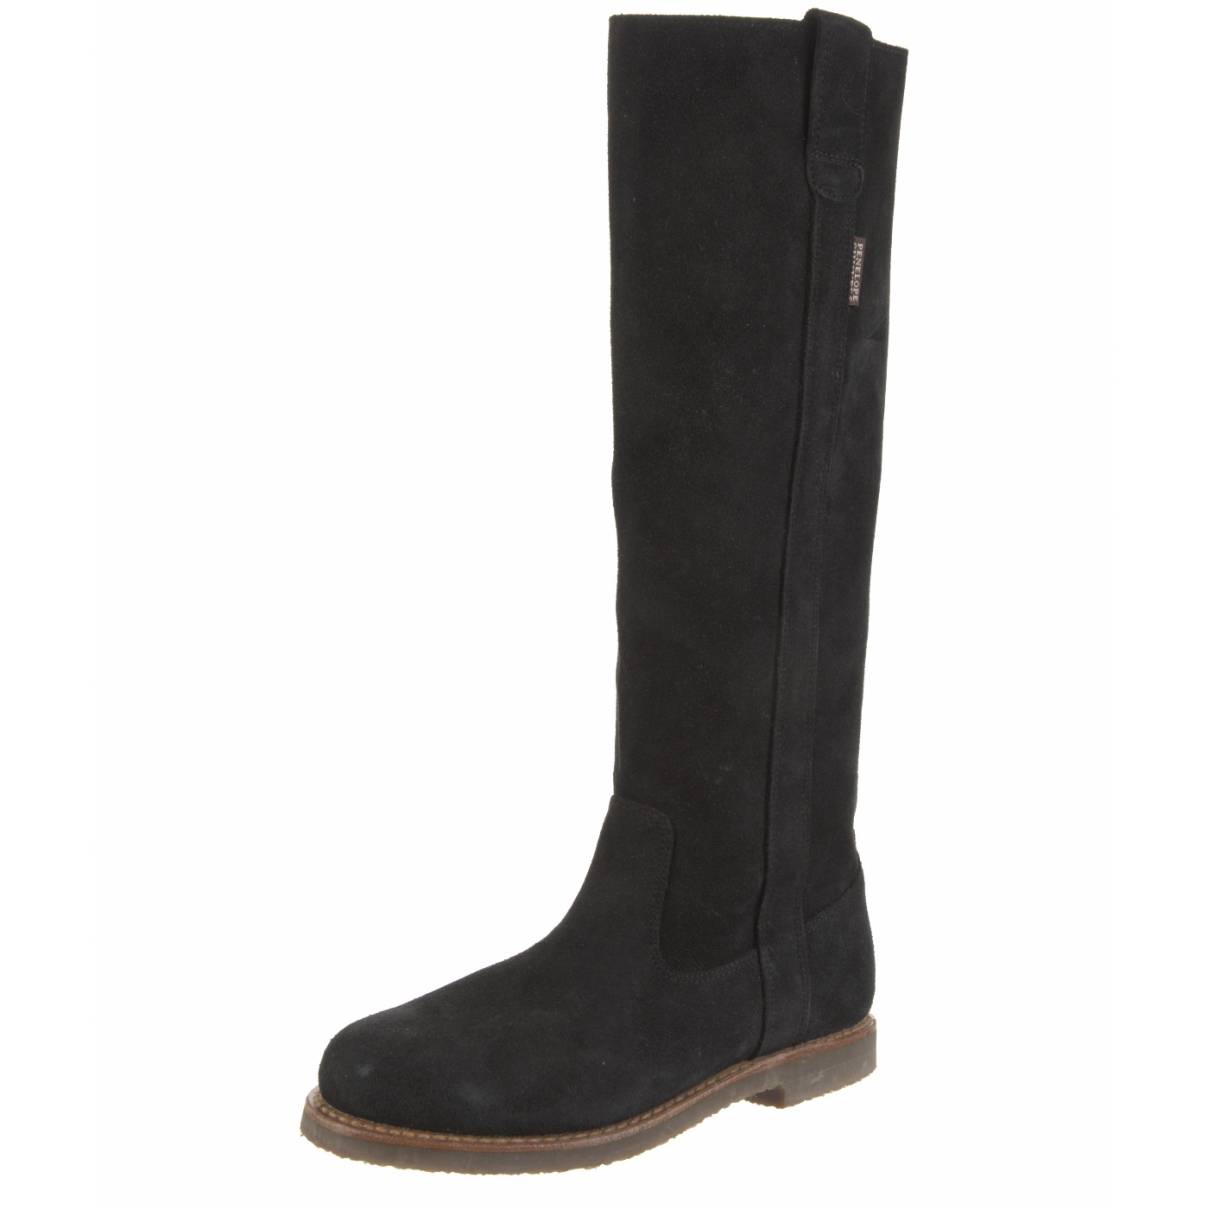 Buy Penelope Chilvers Riding boots online